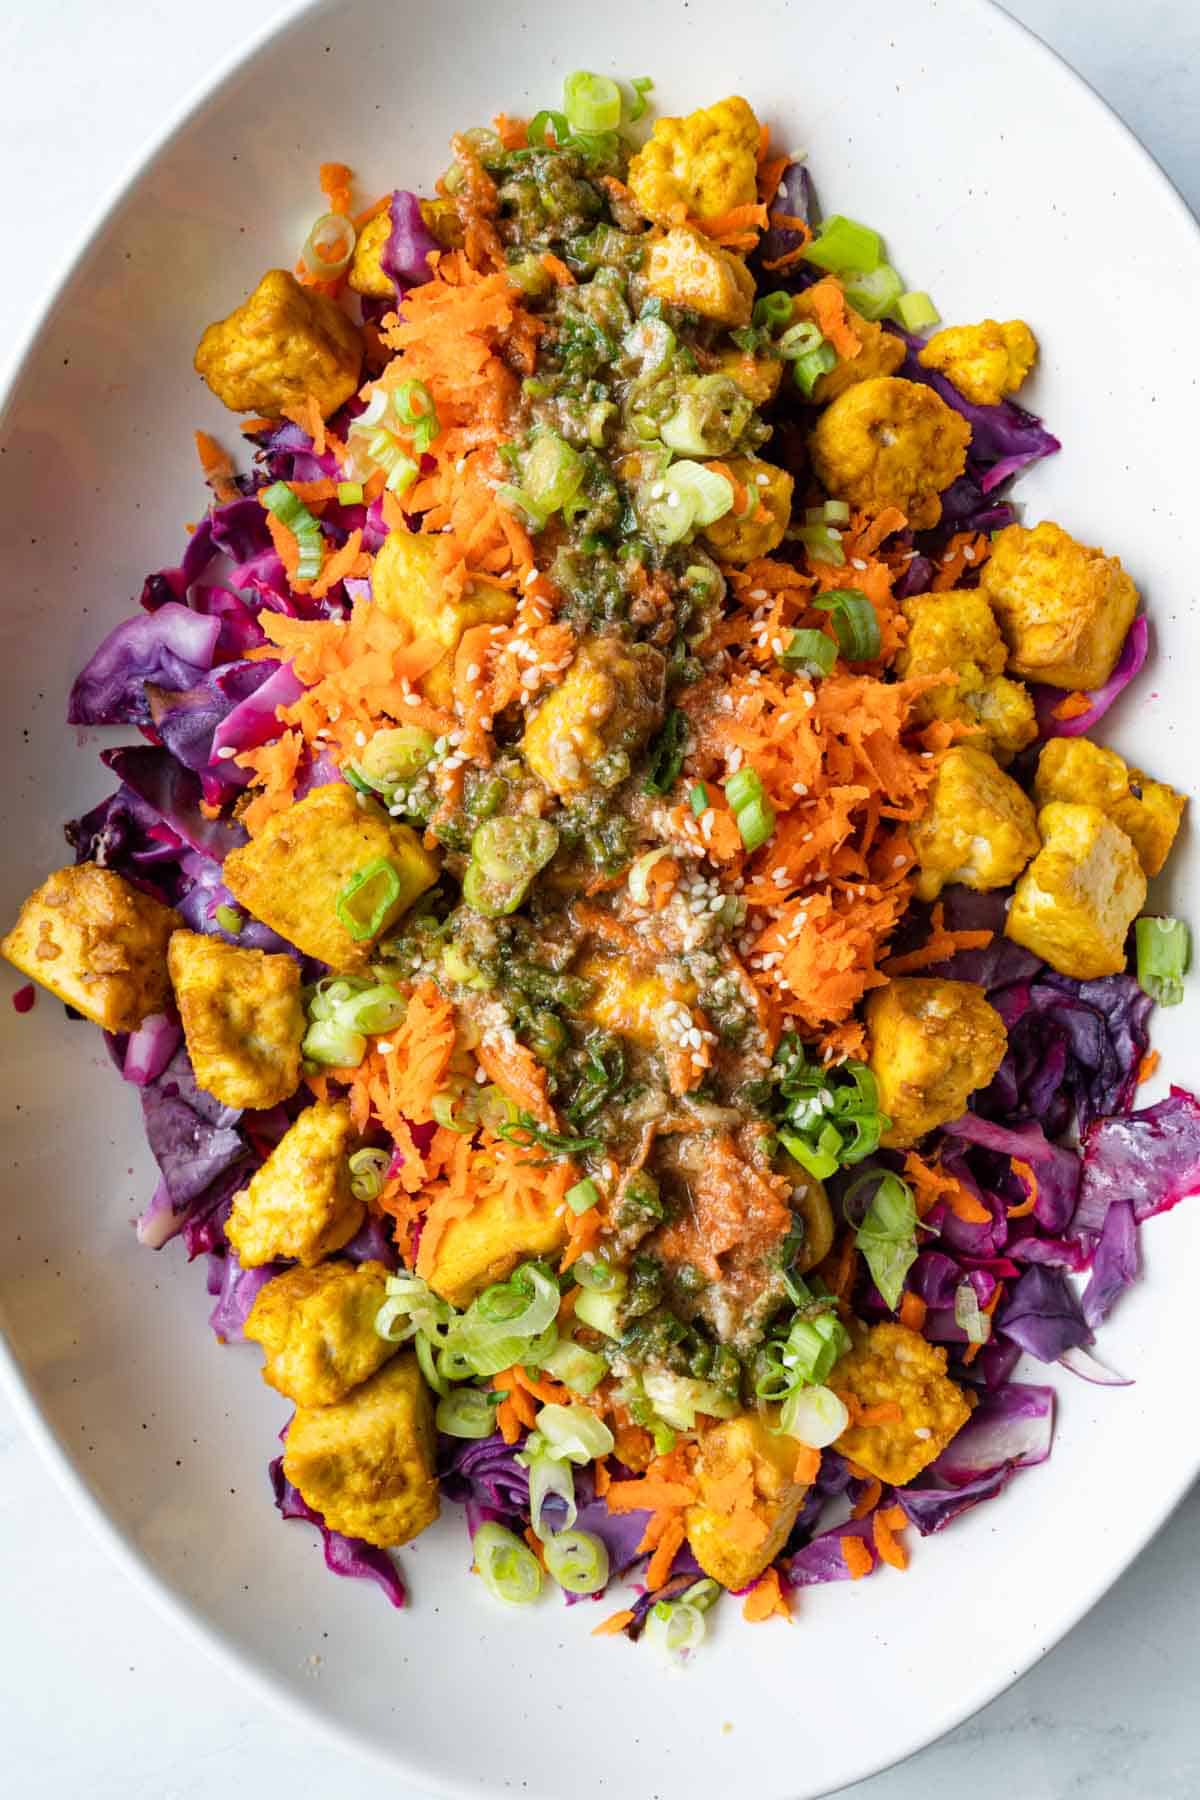 Tofu Salad with roasted tofu and red cabbage, grated carrots, chopped scallions, sesame seeds, and Asian dressing in a white oval bowl.